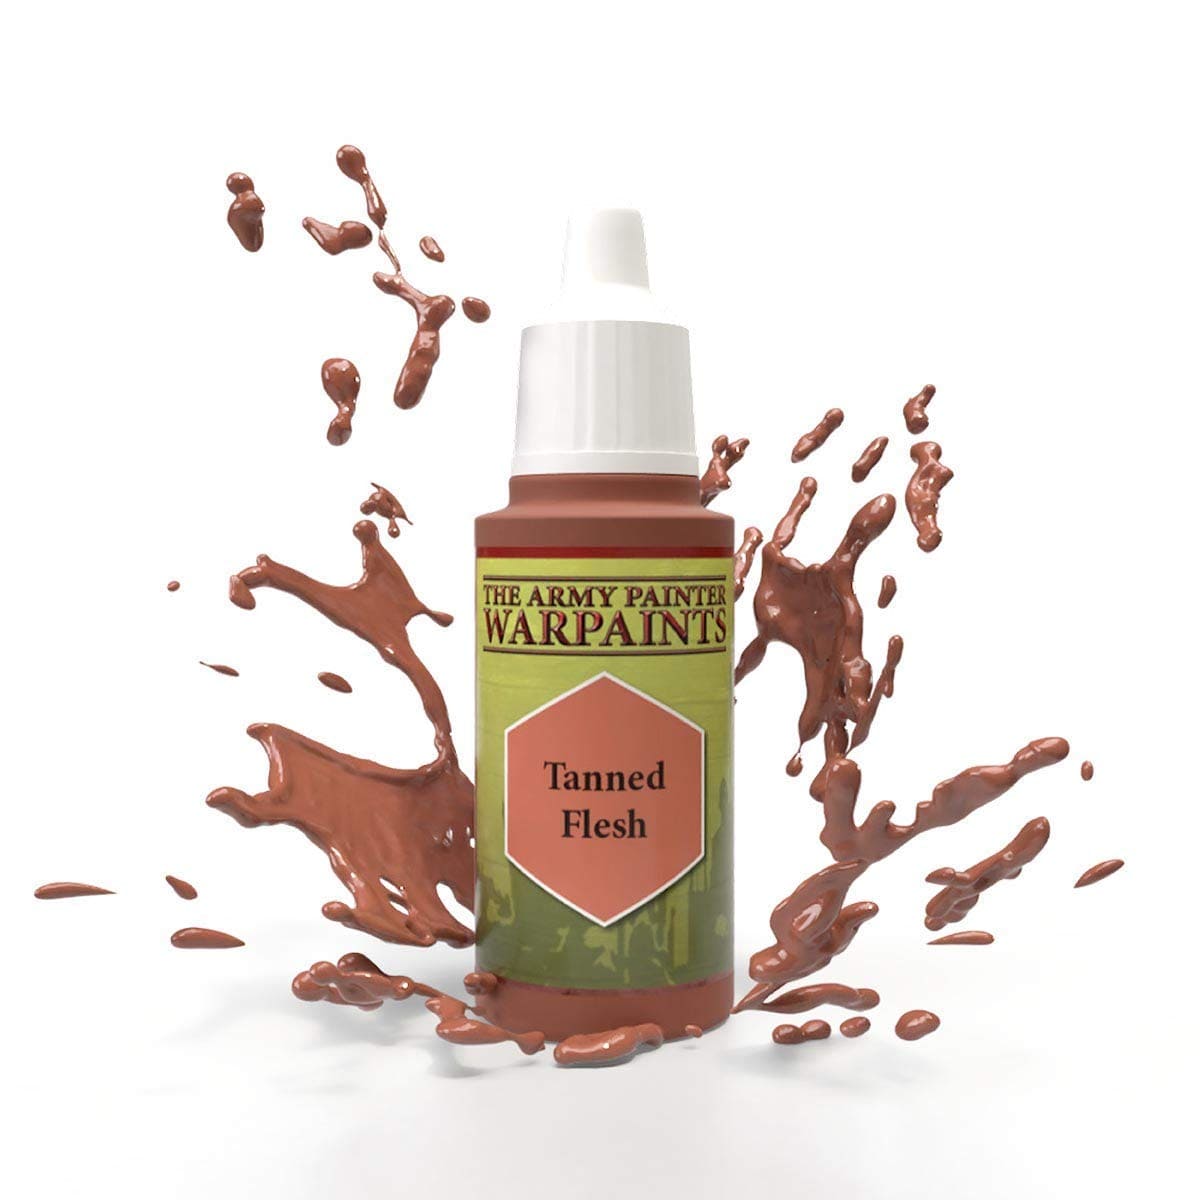 The Army Painter Warpaints: Tanned Flesh 18ml - Lost City Toys